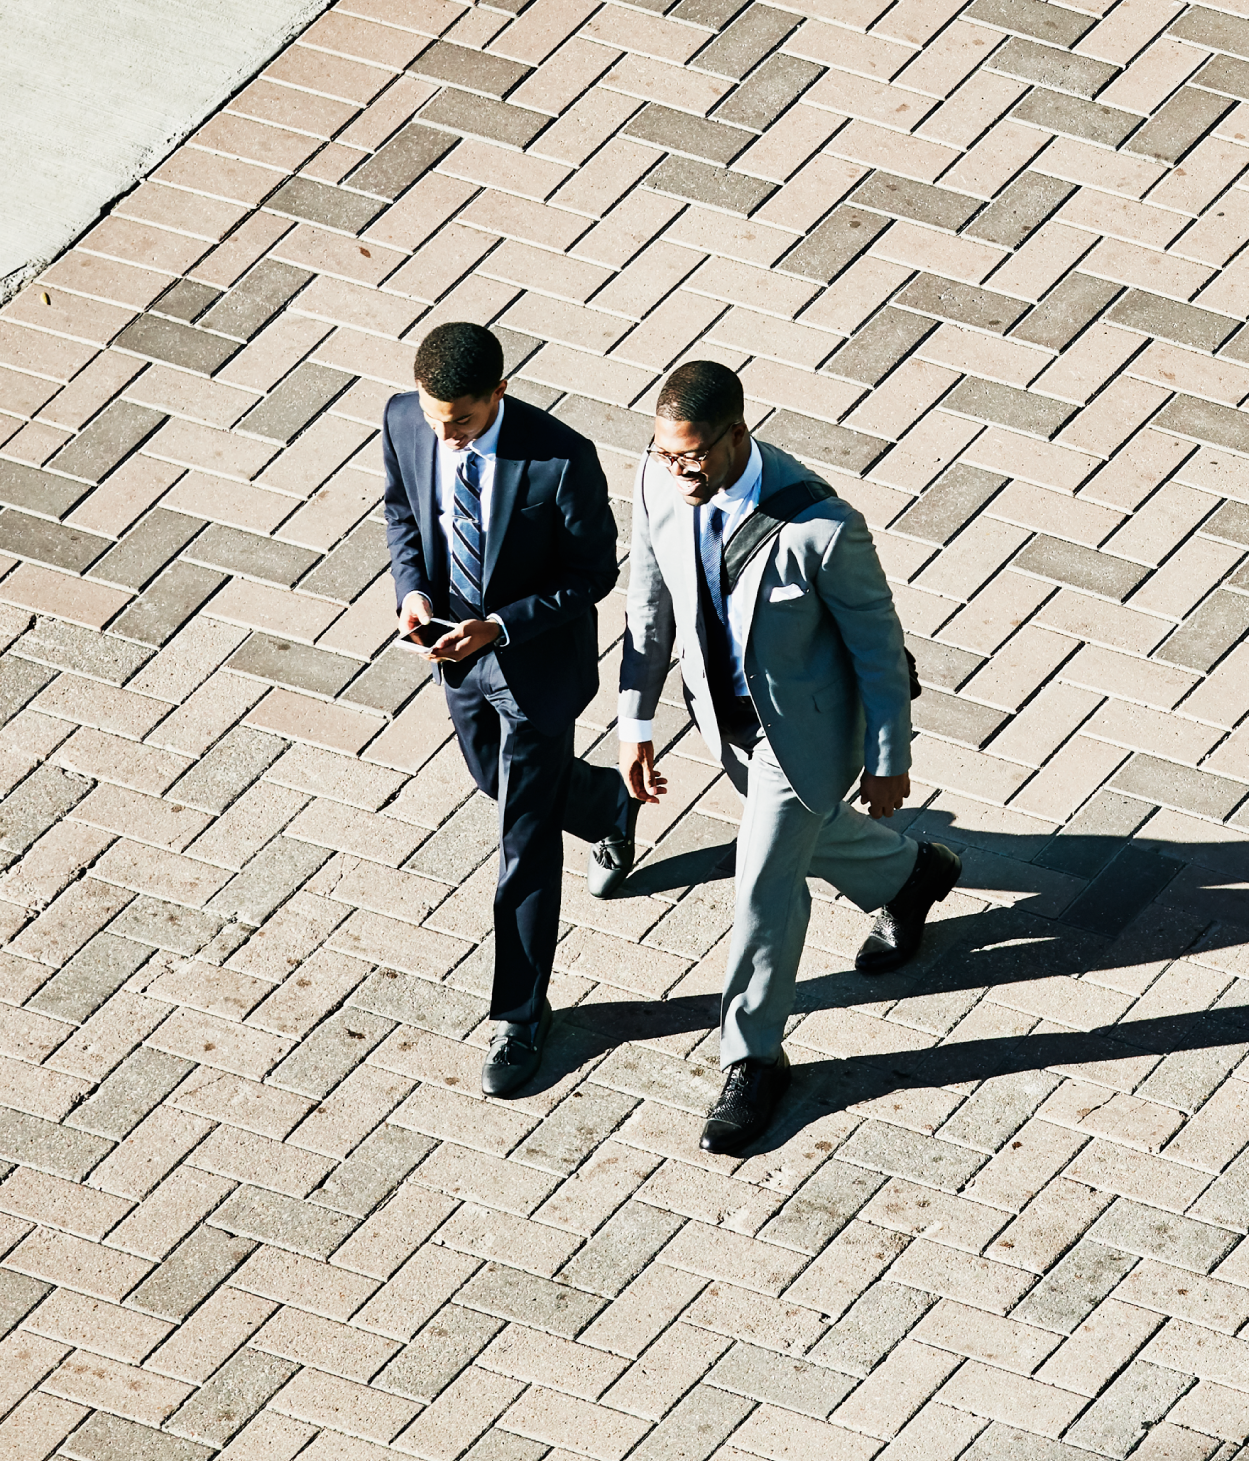 Aerial view of two people walking down the street wearing business suits